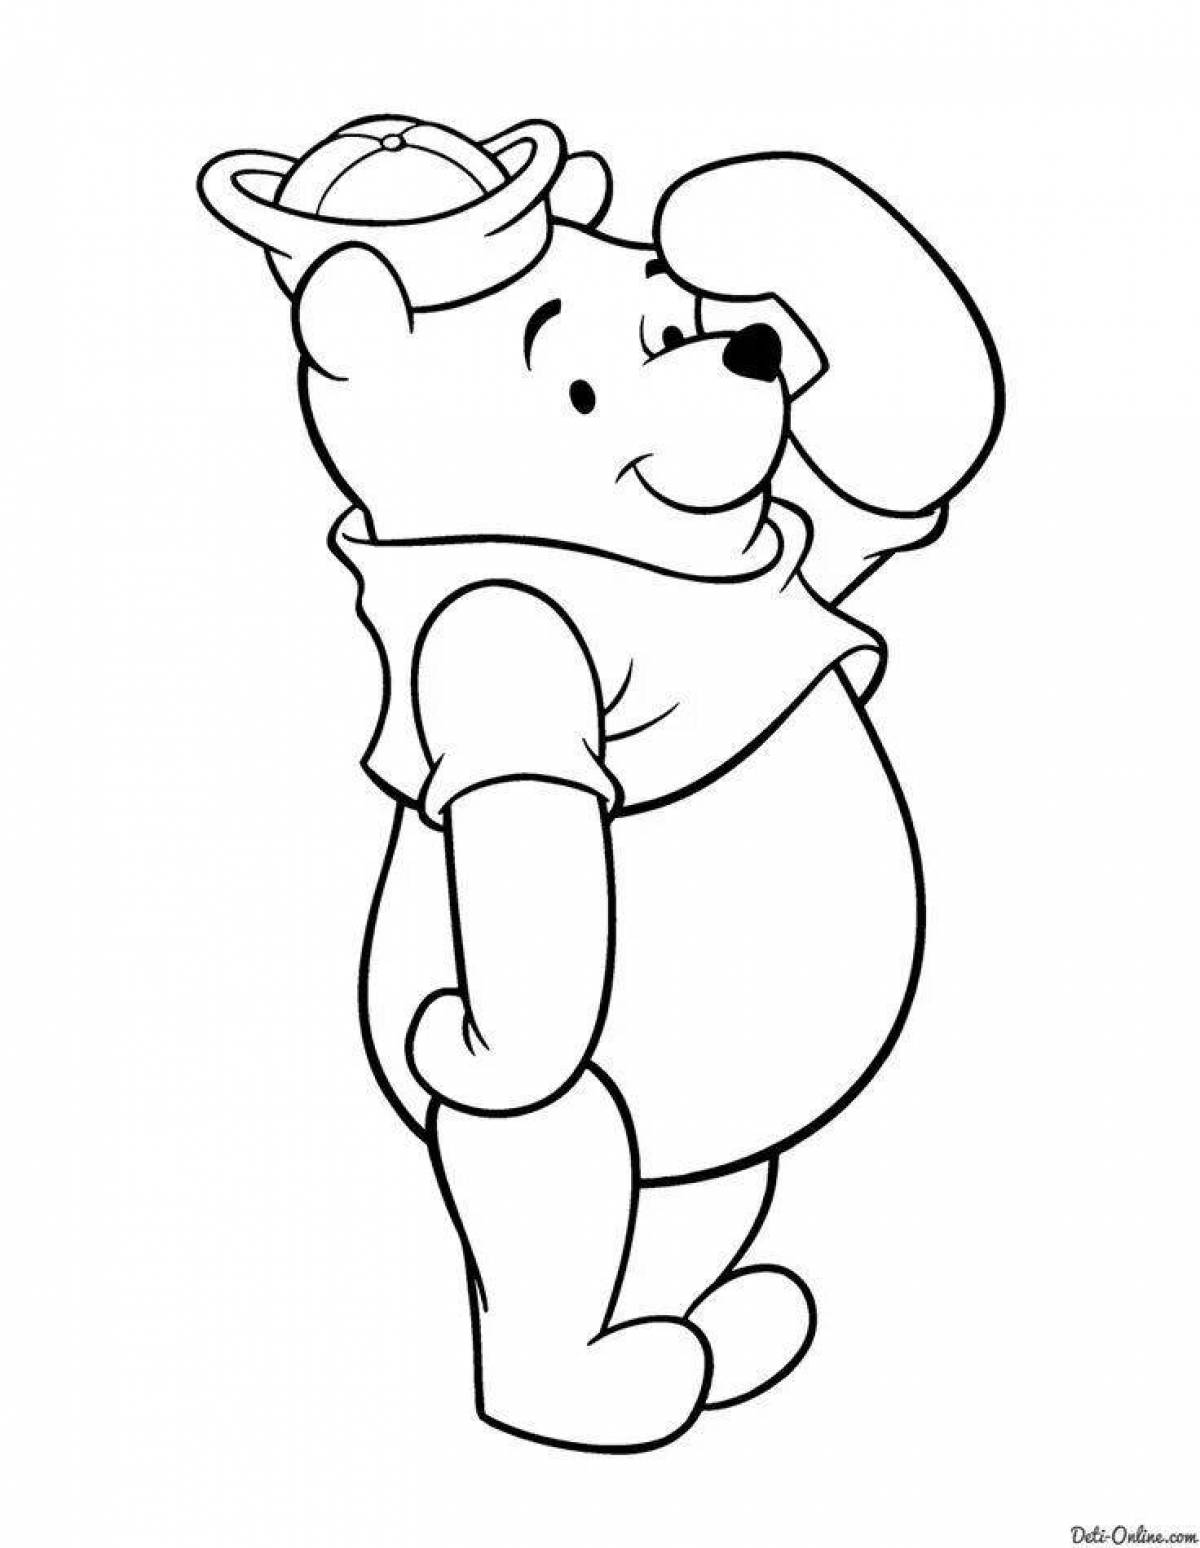 Coloring winnie the pooh